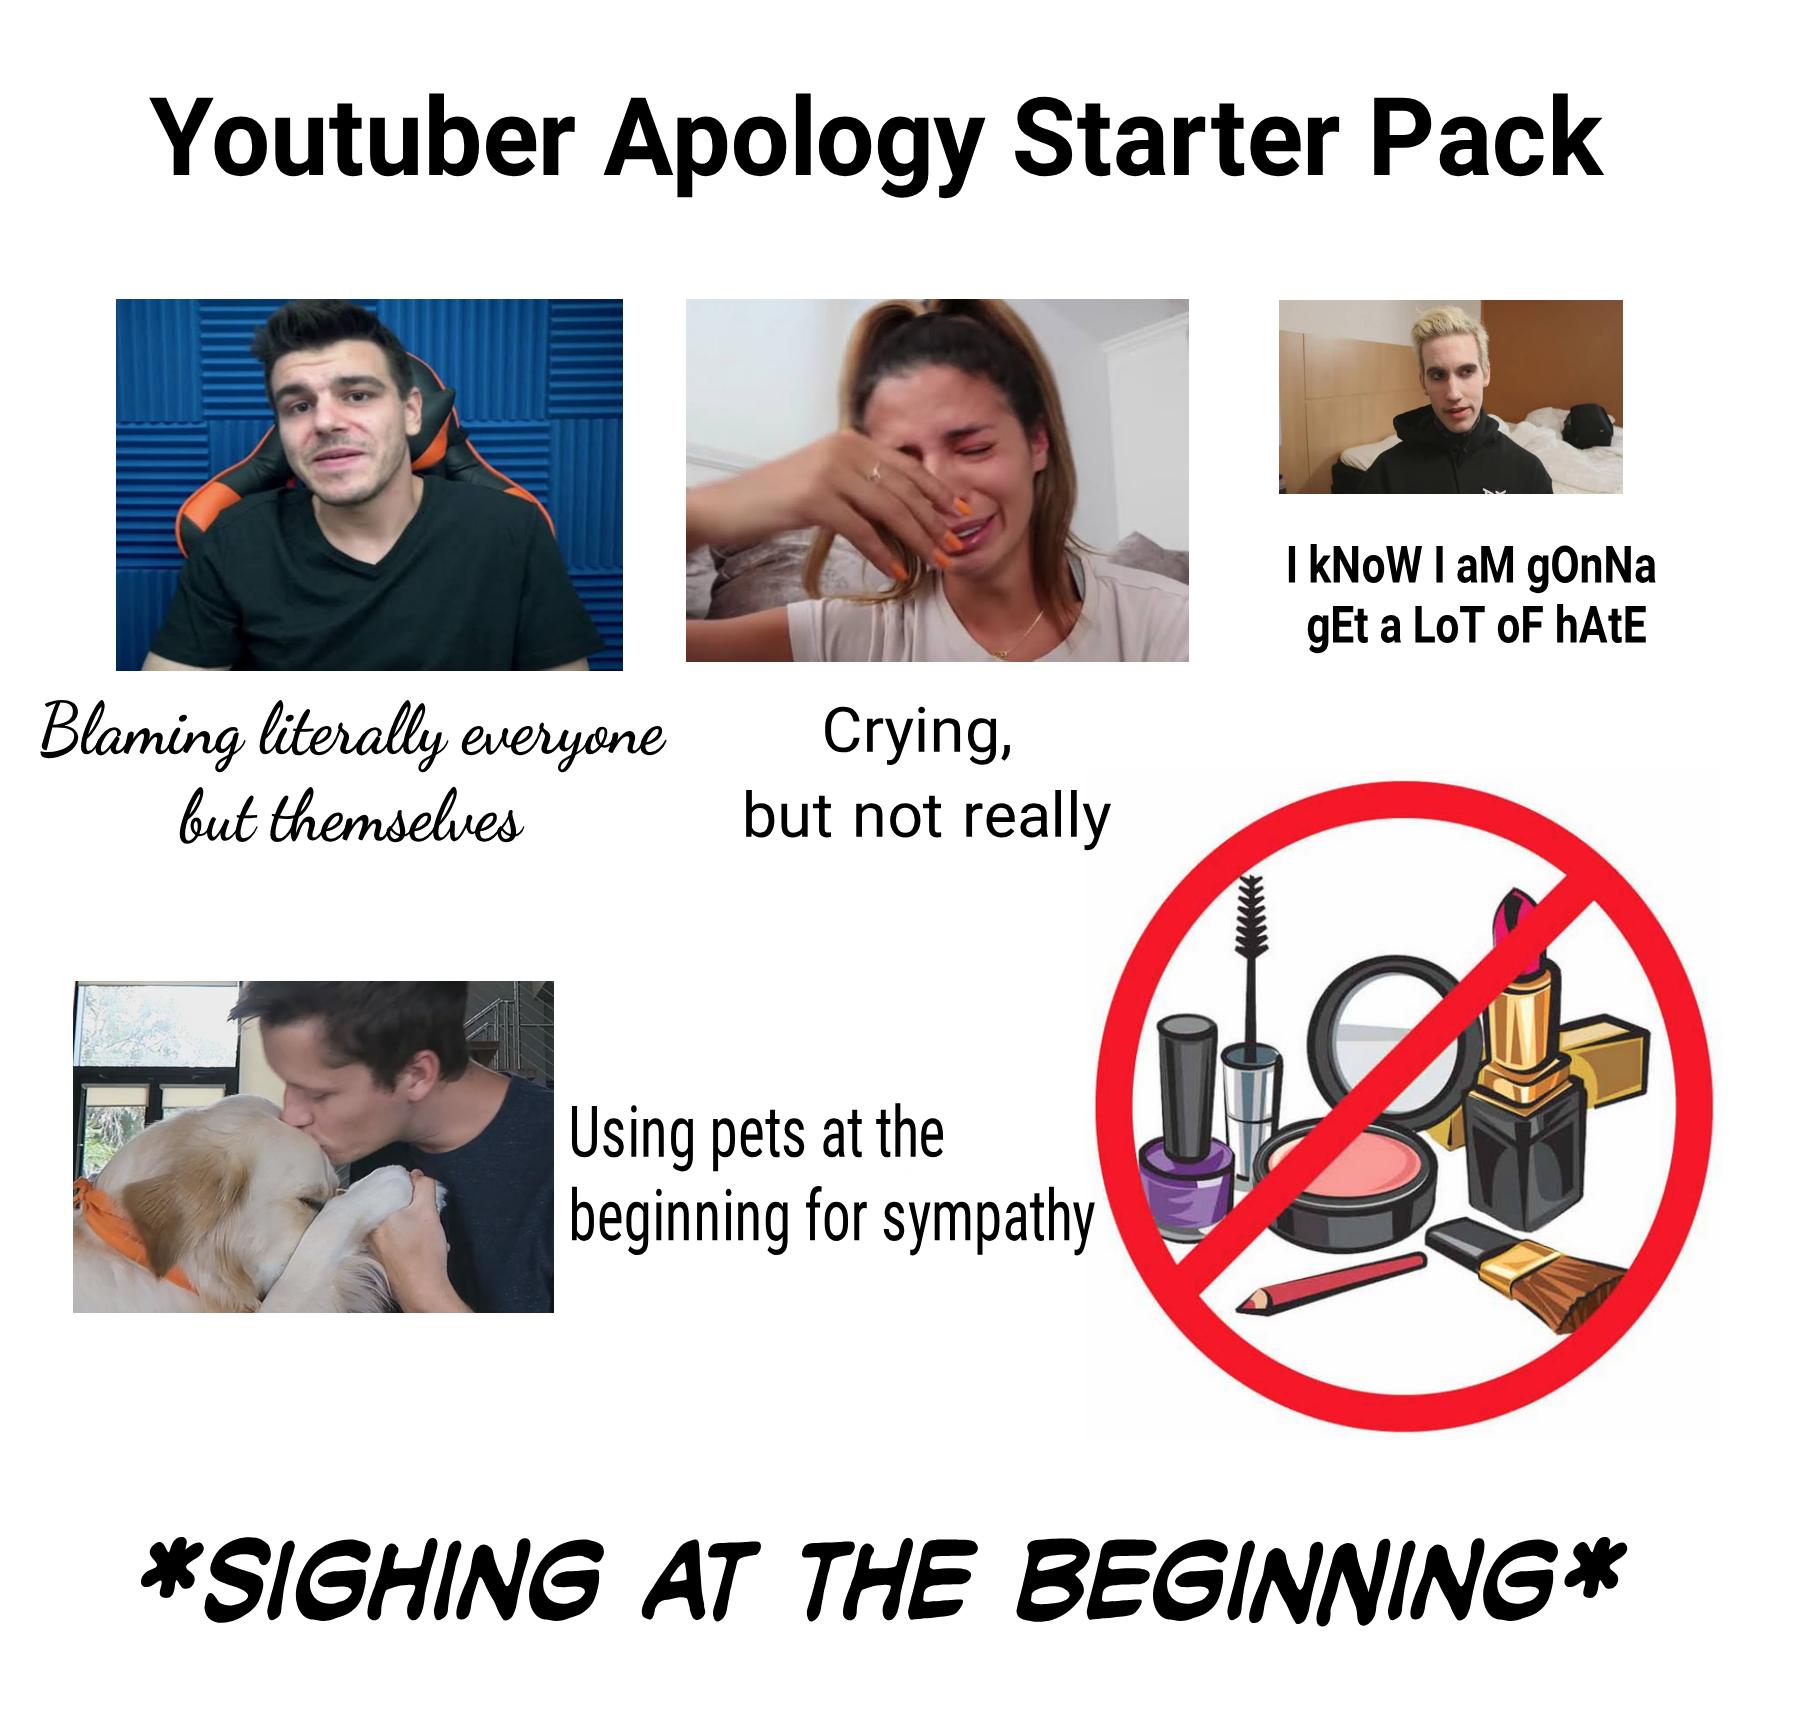 Starter Pack Meme - Youtuber Apology Starter Pack I Know I am gOnNa gEt a Lot Of hAtE Blaming literally everyone but themselves Crying, but not really Using pets at the | beginning for sympathy Sighing At The Beginning